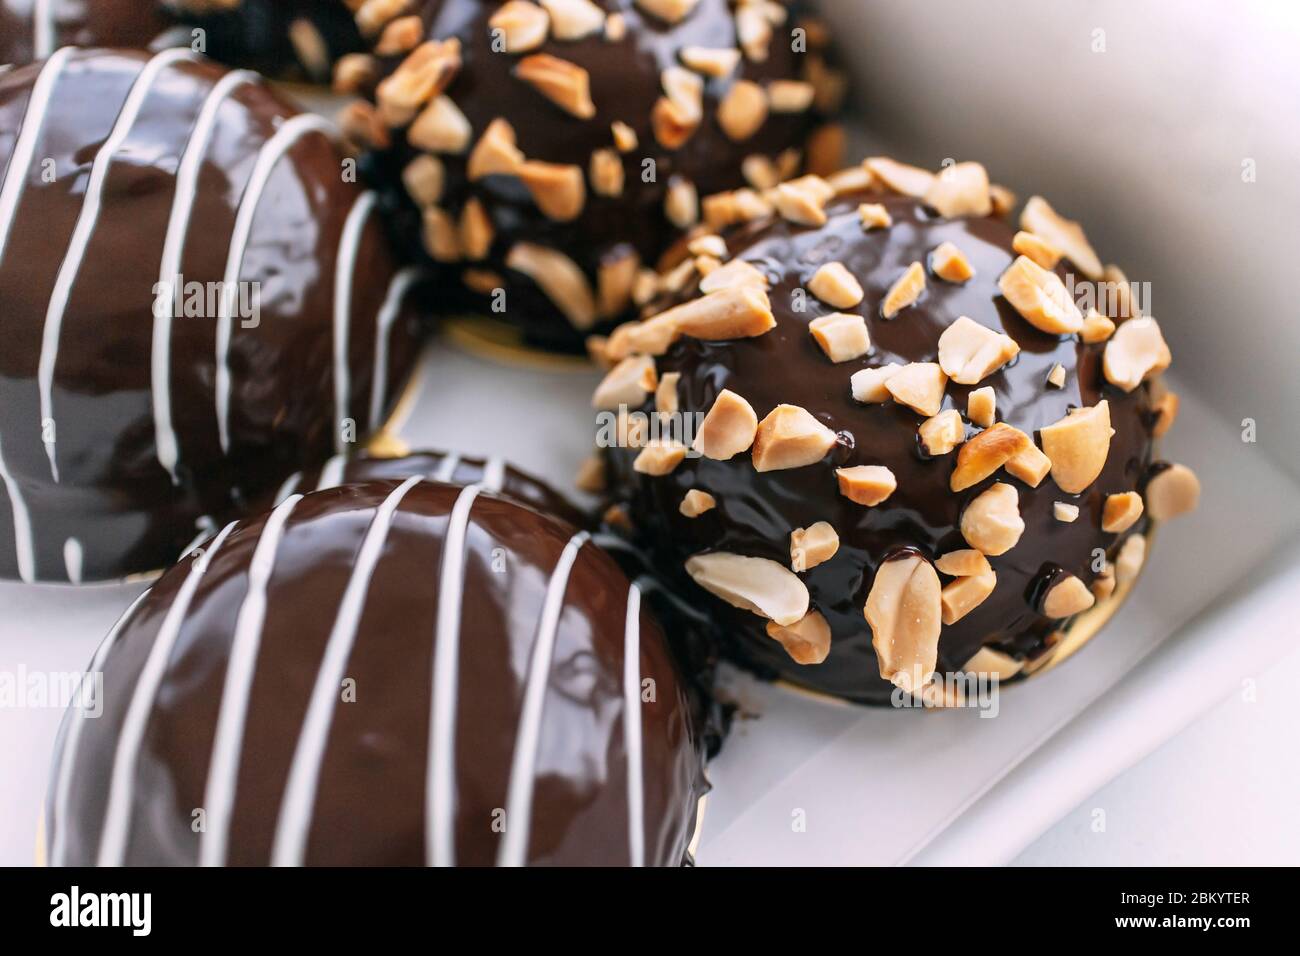 Chocolate covered Bavarian cream donut topping with crush peanuts in paper box. Tasty dessert pastry. Stock Photo